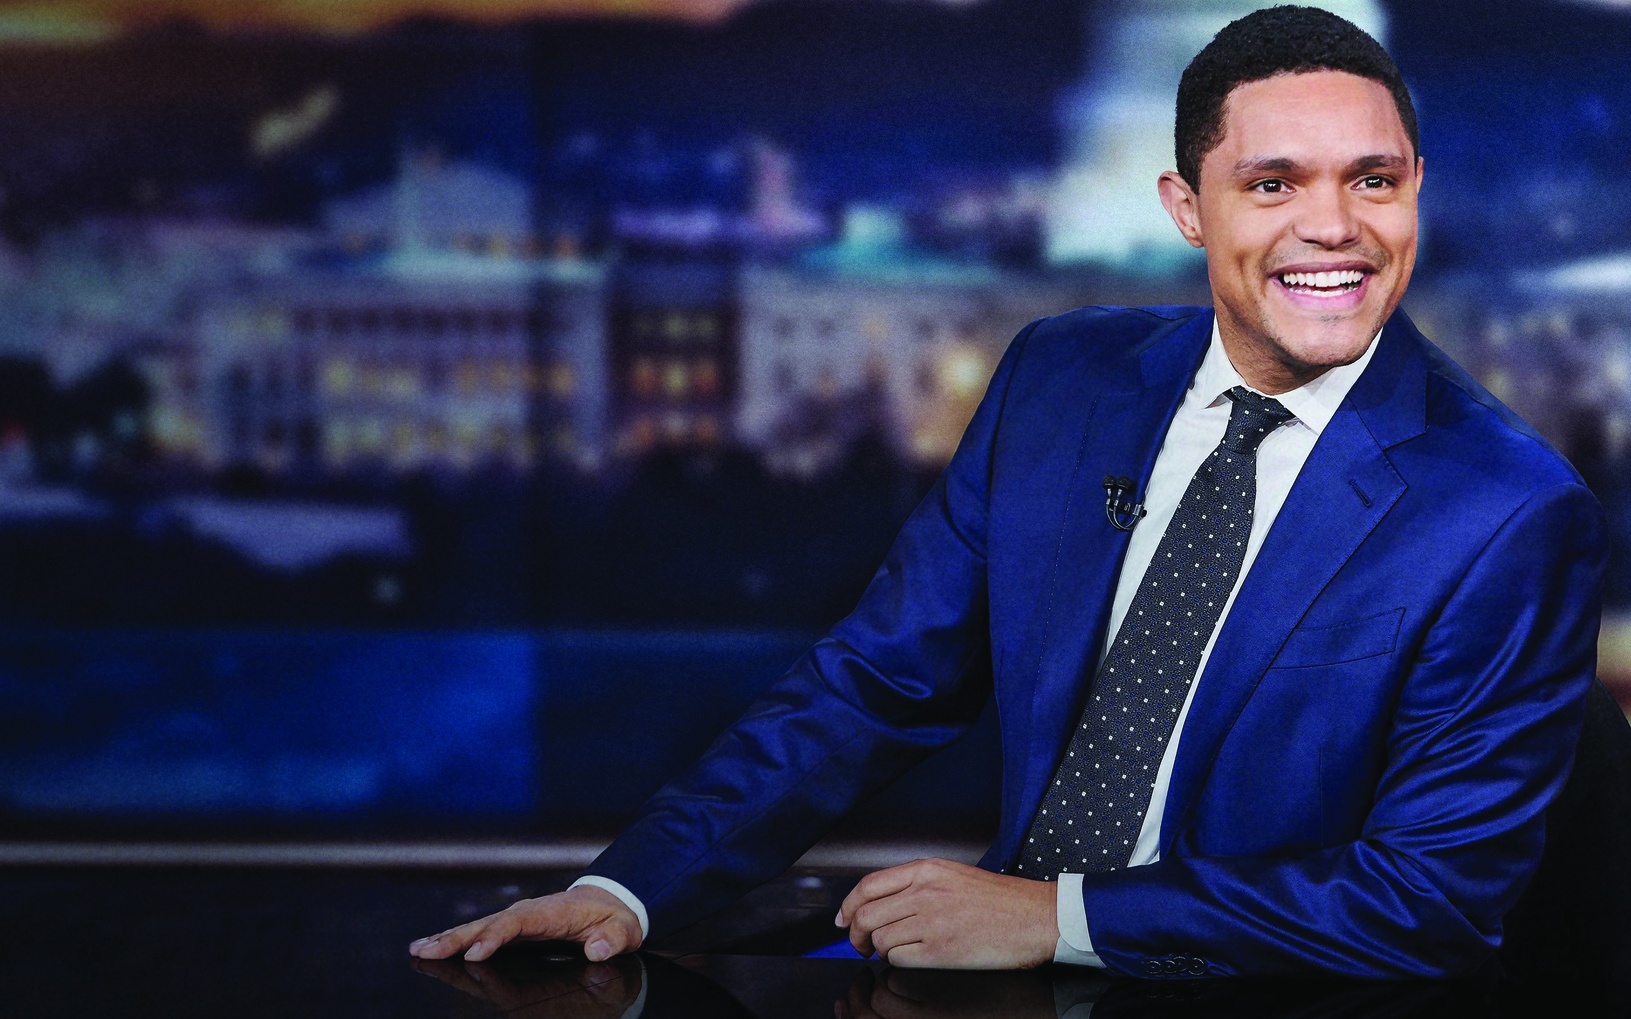 Happily Trevor After – From a nobody to the most talked-about TV host in the US